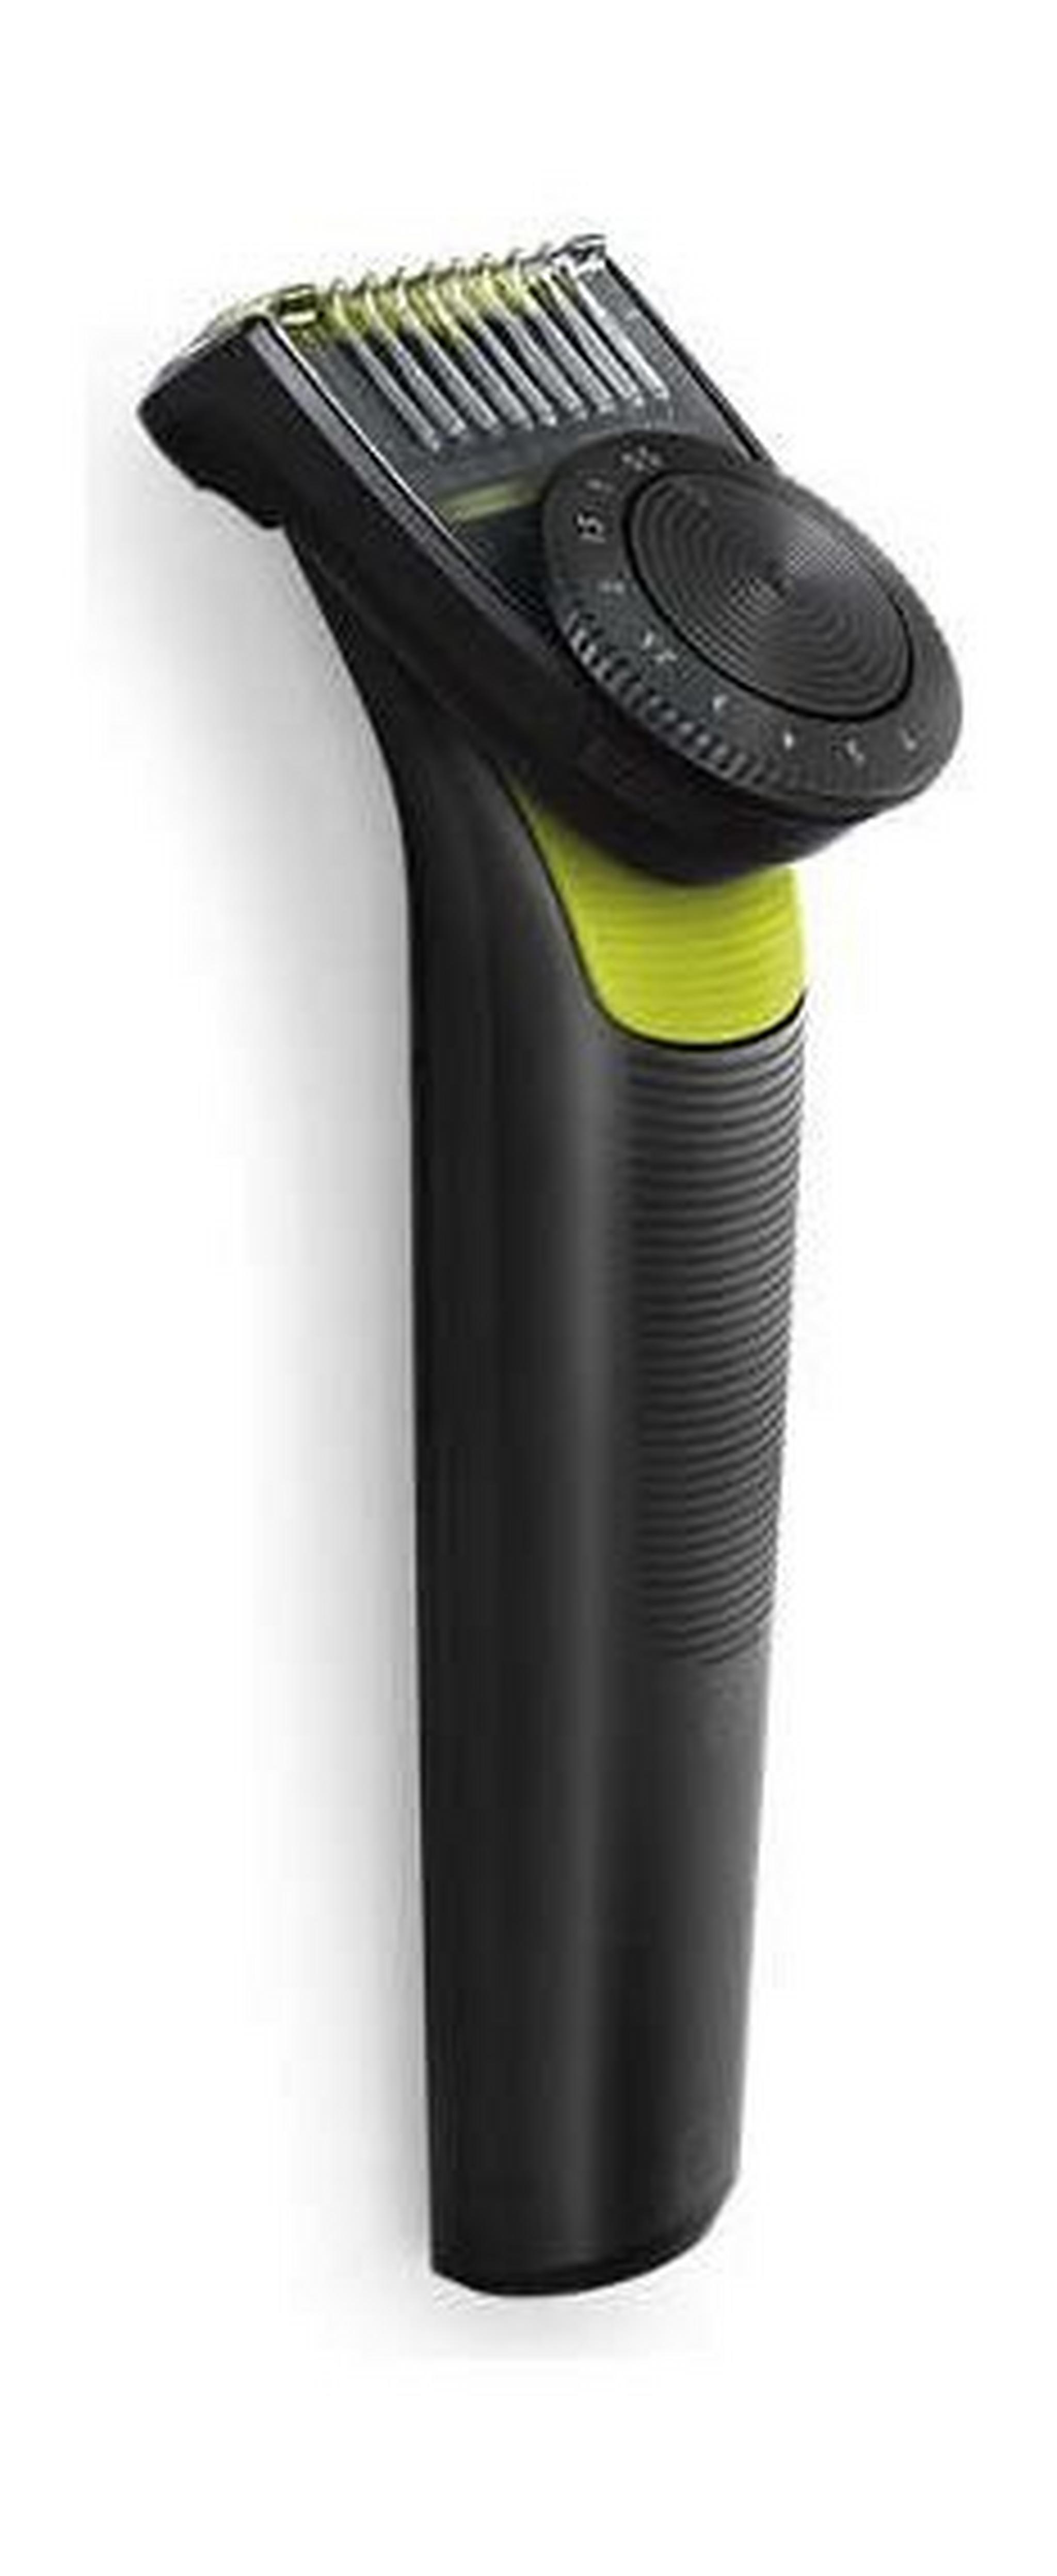 Philips OneBlade Pro Shaver and Trimmer - QP6505/23